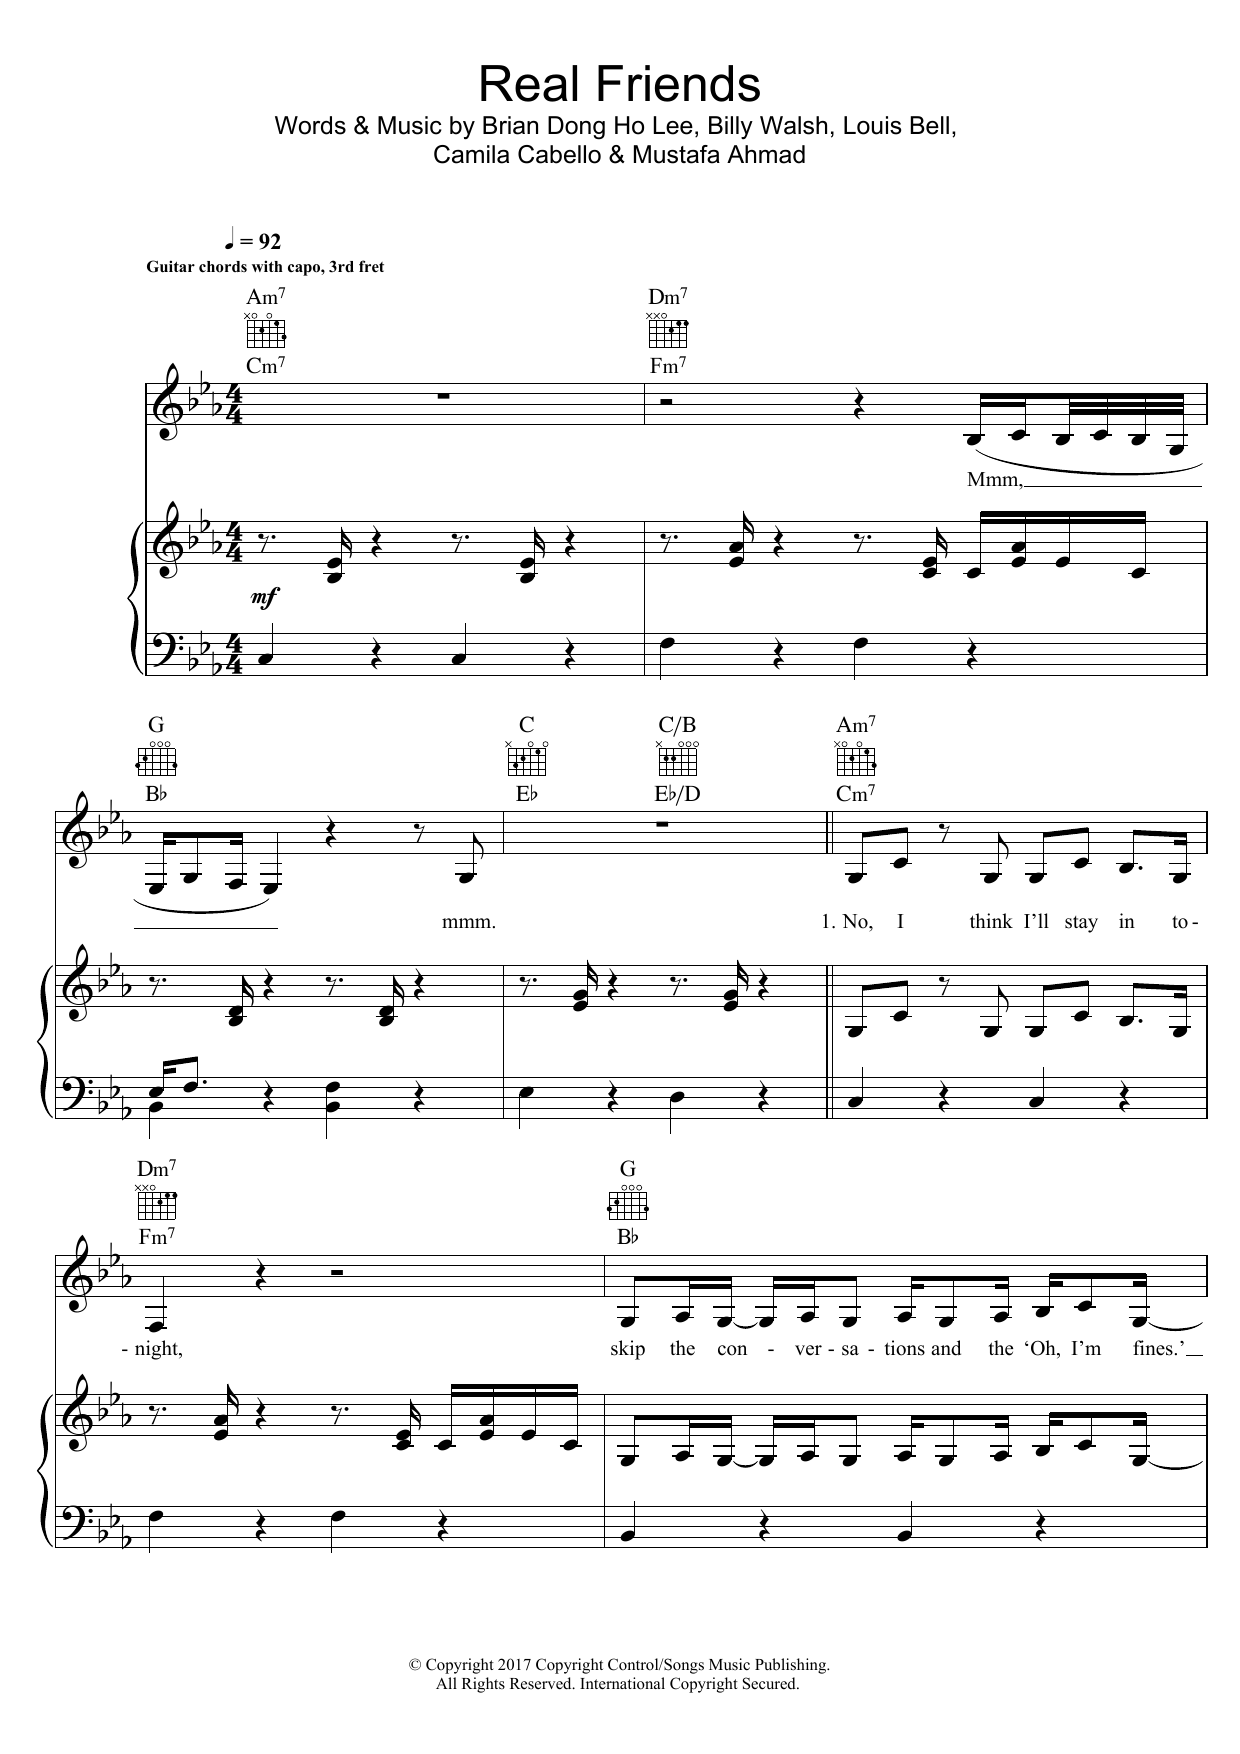 Download Camila Cabello Real Friends Sheet Music